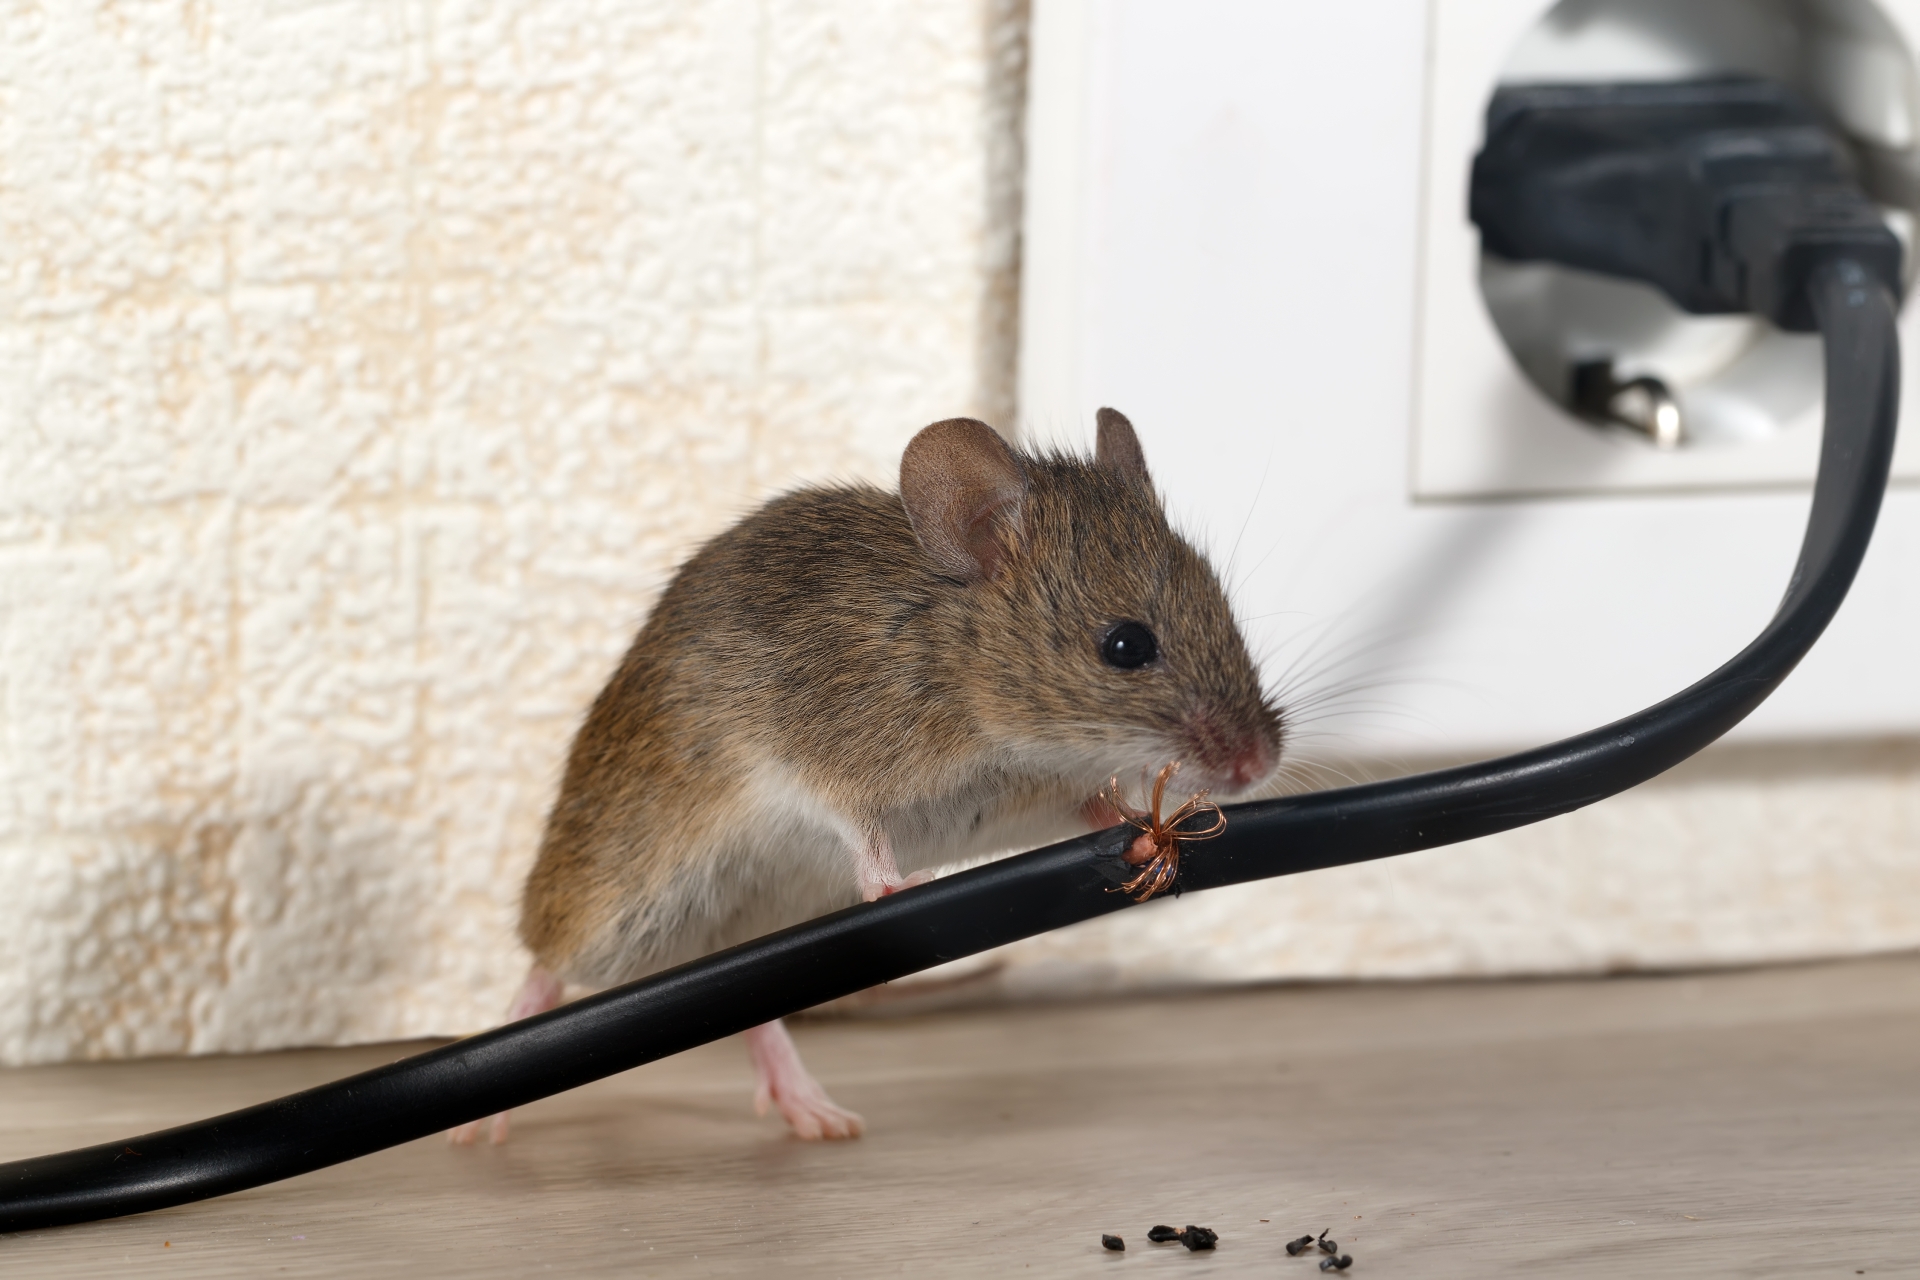 Mice Infestation, Pest Control in Harold Wood, Harold Hill, Noak Hill, RM3. Call Now 020 8166 9746